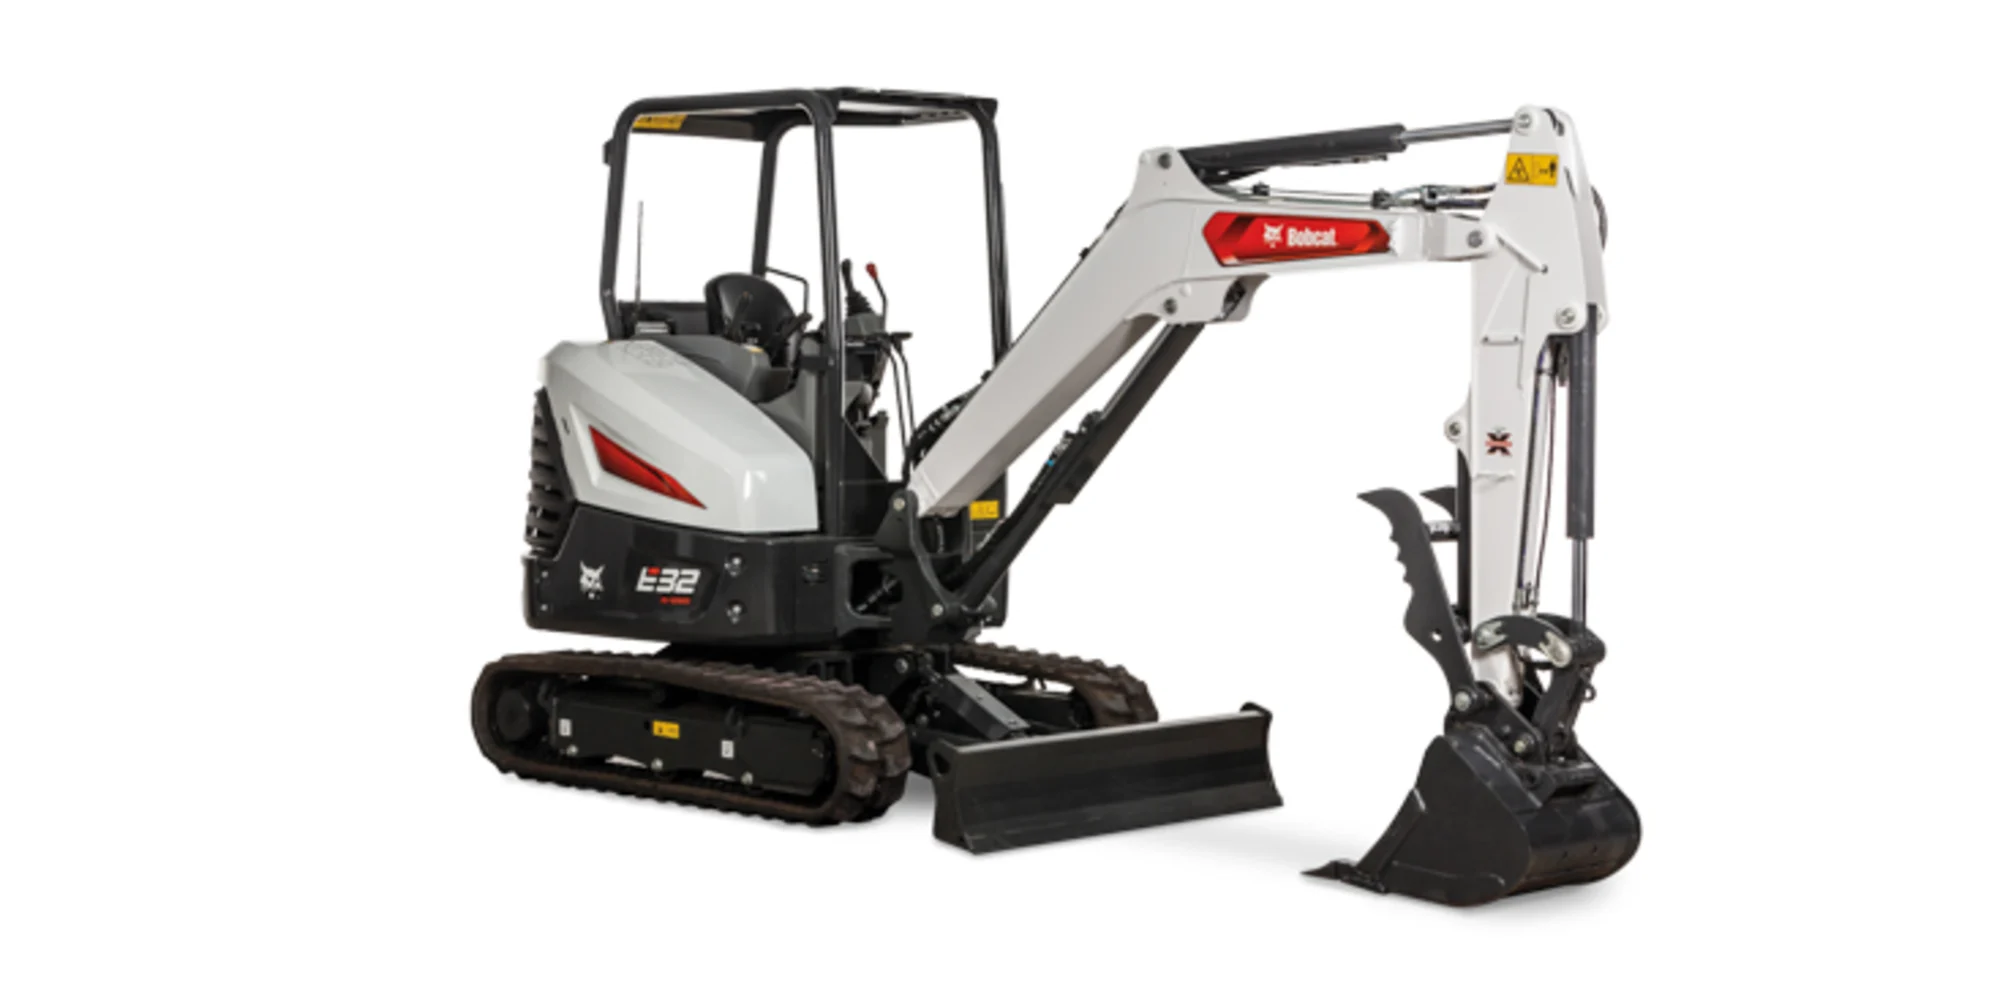 Browse Specs and more for the E32 Compact Excavator - K.C. Bobcat